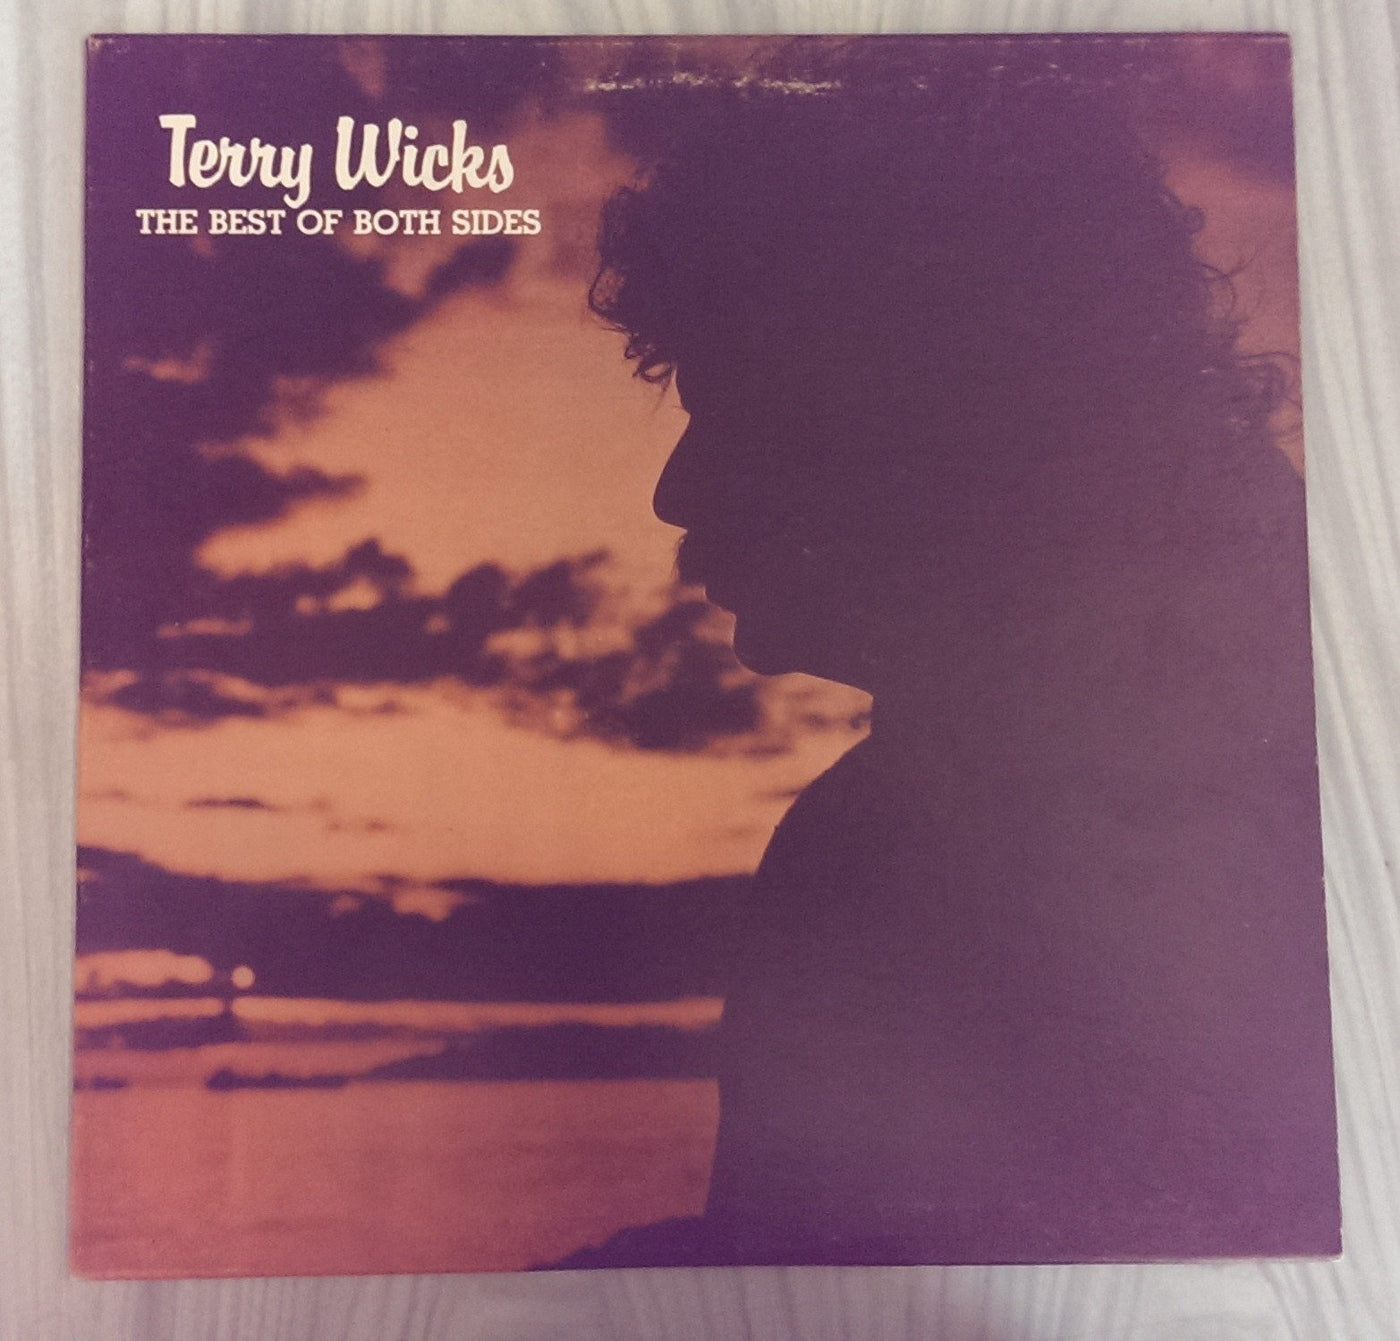 Terry Wicks - The Best Of Both Sides